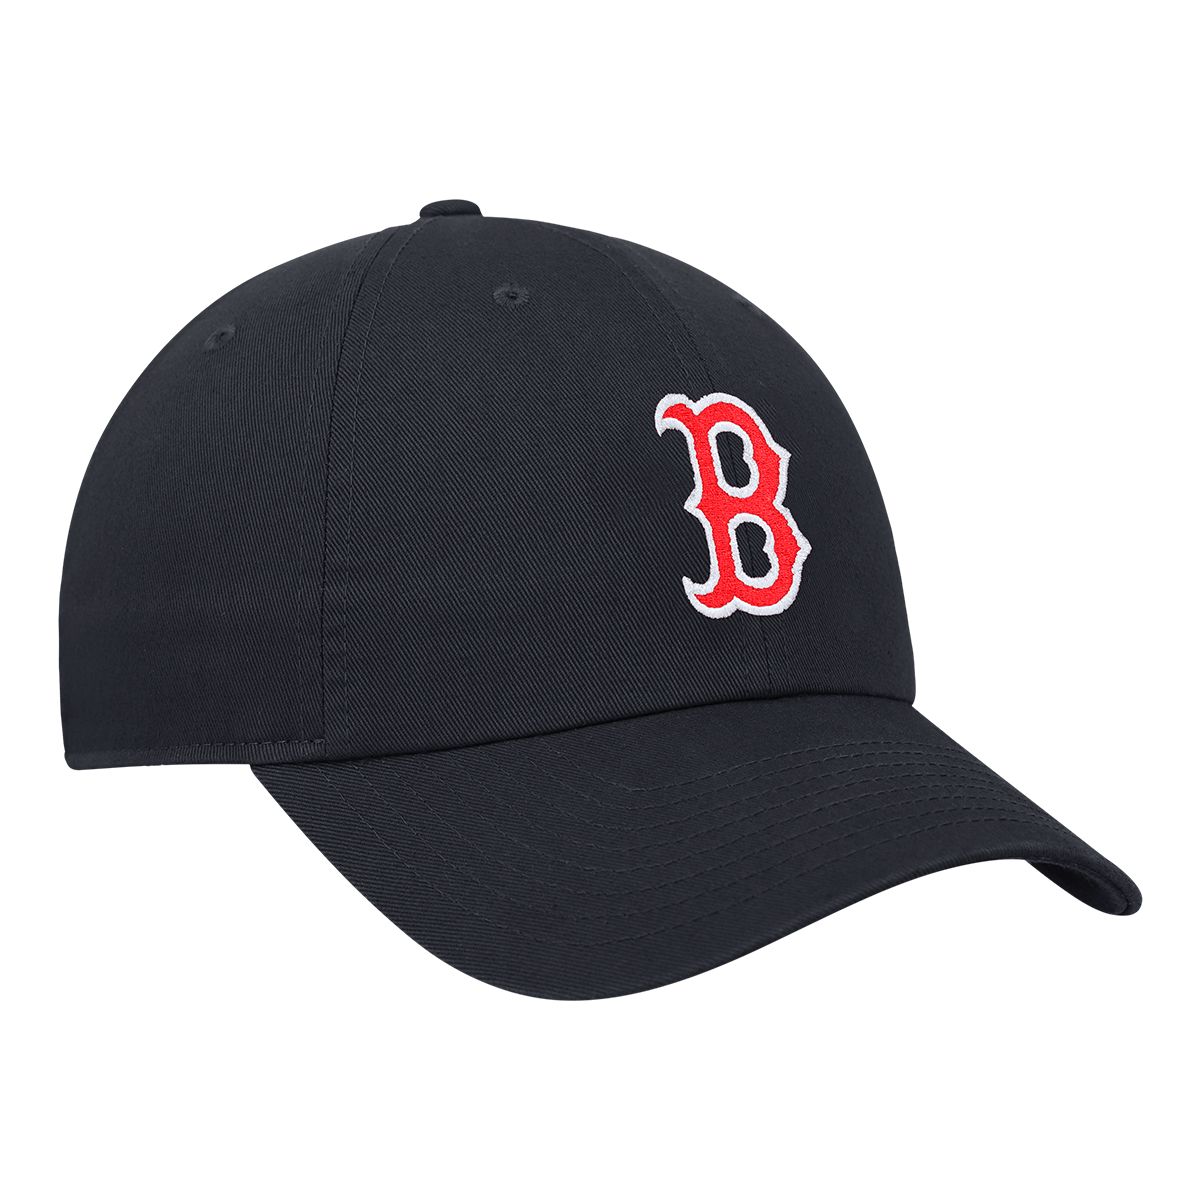 NIKE Boston Red Sox Nike Heritage86 Current Unstruct Cotton Twill Cap